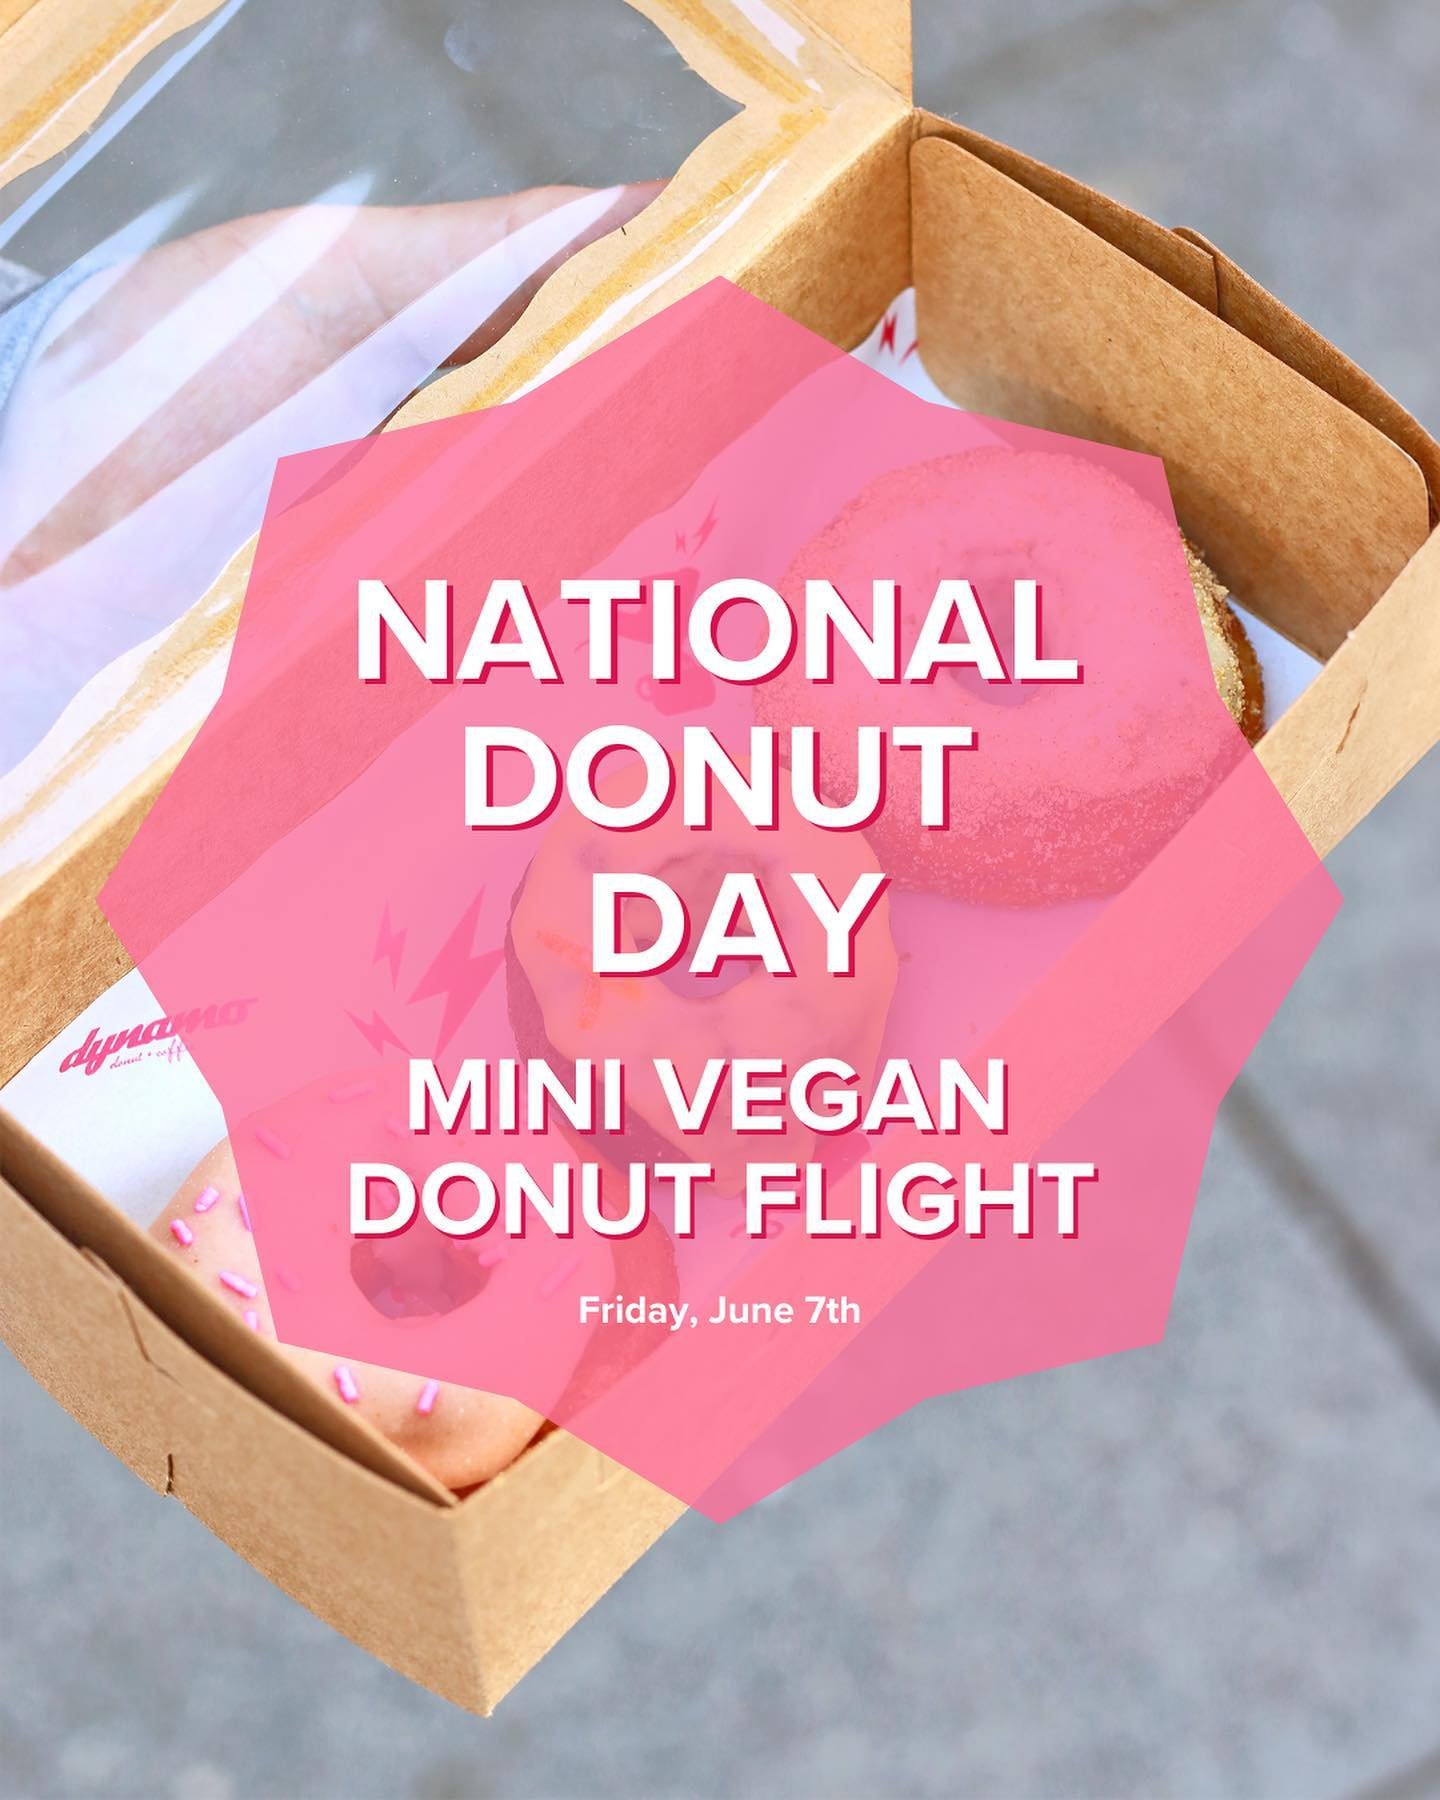 #NationalDonutDay is Friday, June 7th!

To celebrate, we&rsquo;ll be offering a flight of three vegan flavors that were suggested by our customers 🫶

Each box will contain the following flavors:

🍊Yuzu Orange Chocolate
Our vegan chocolate base is d